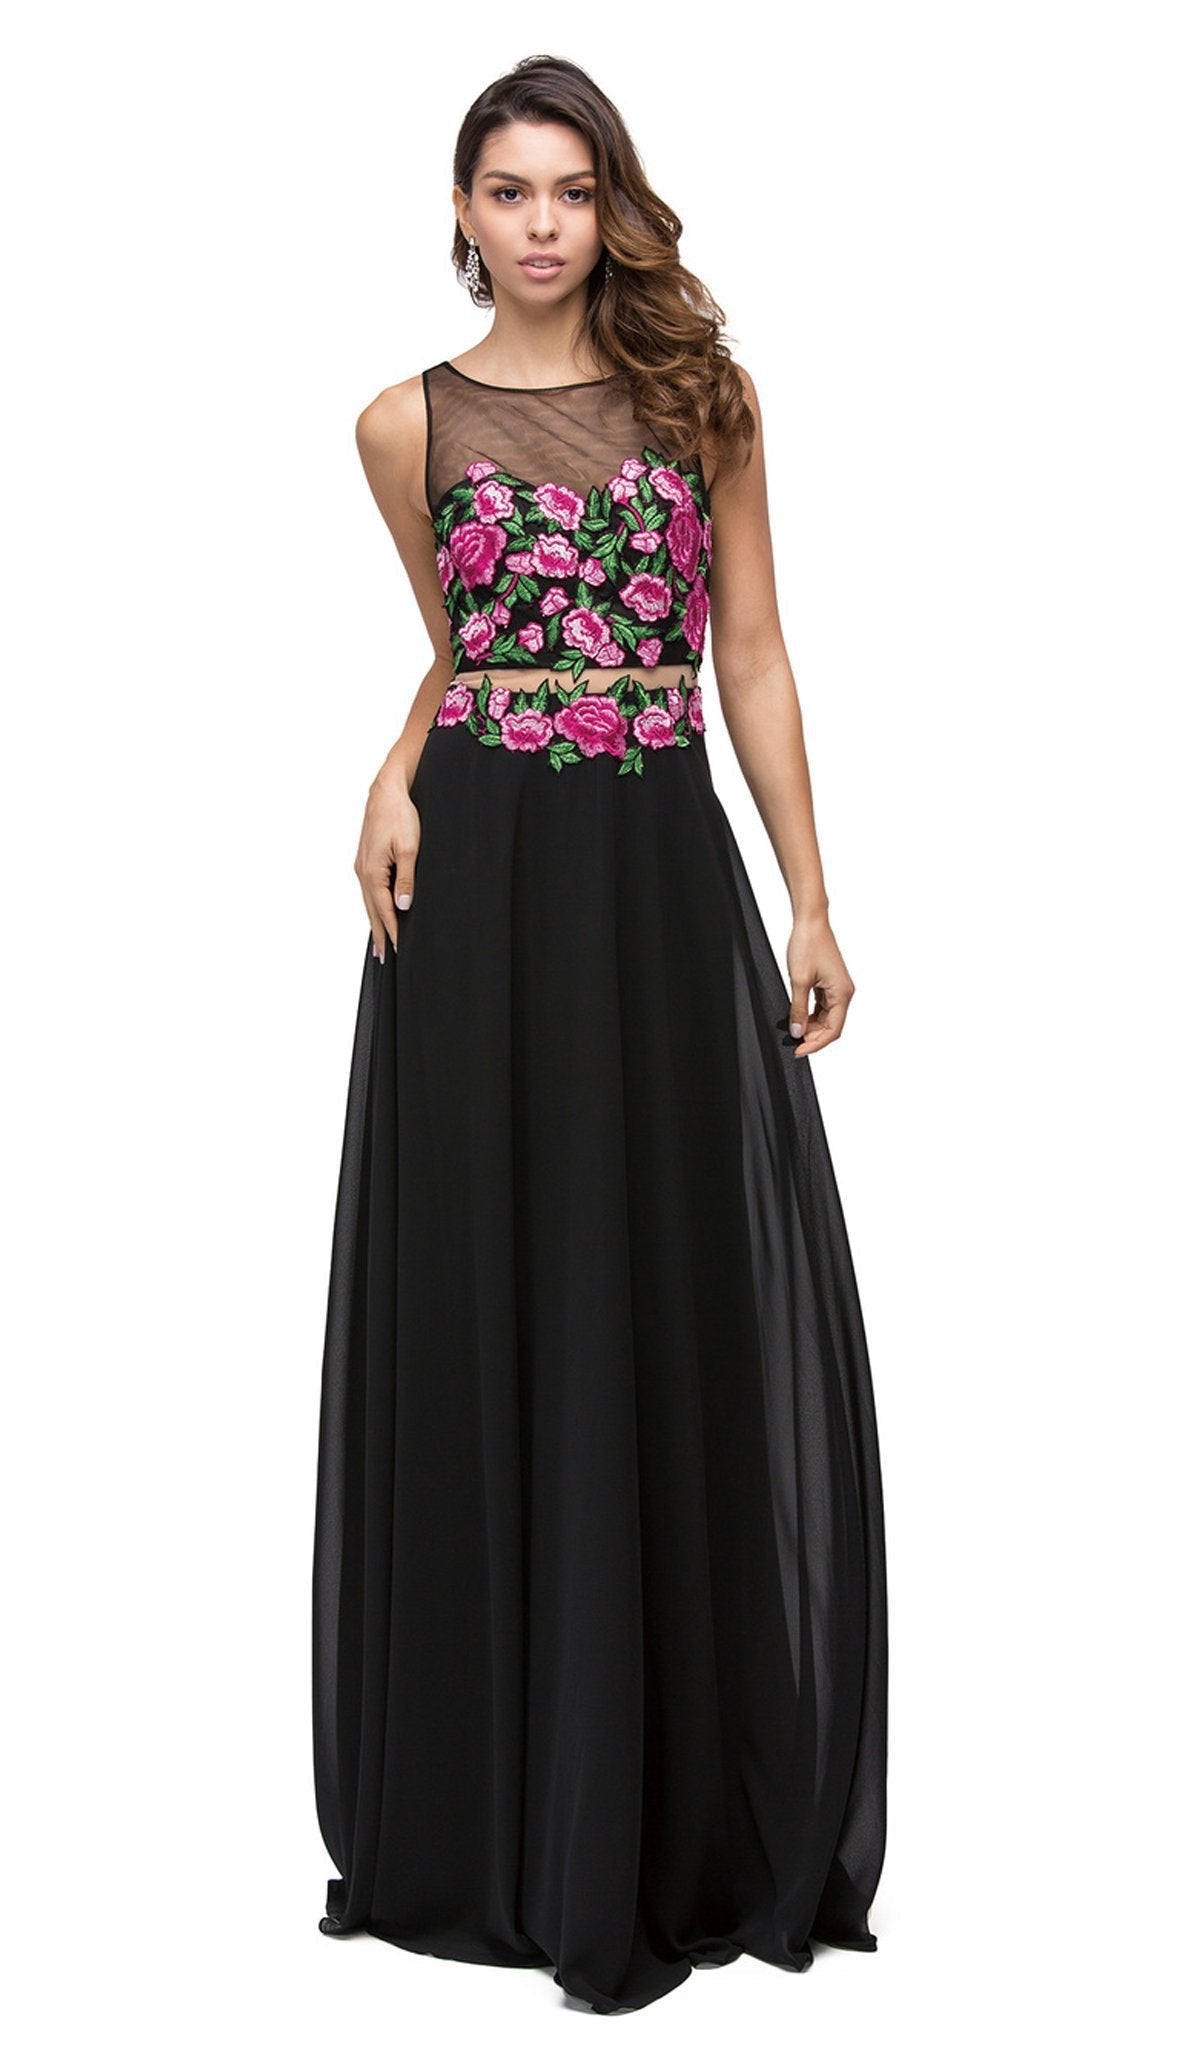 Dancing Queen - 9800 Simulated Two-Piece Embroidered Applique Evening Dress Special Occasion Dress XS / Black